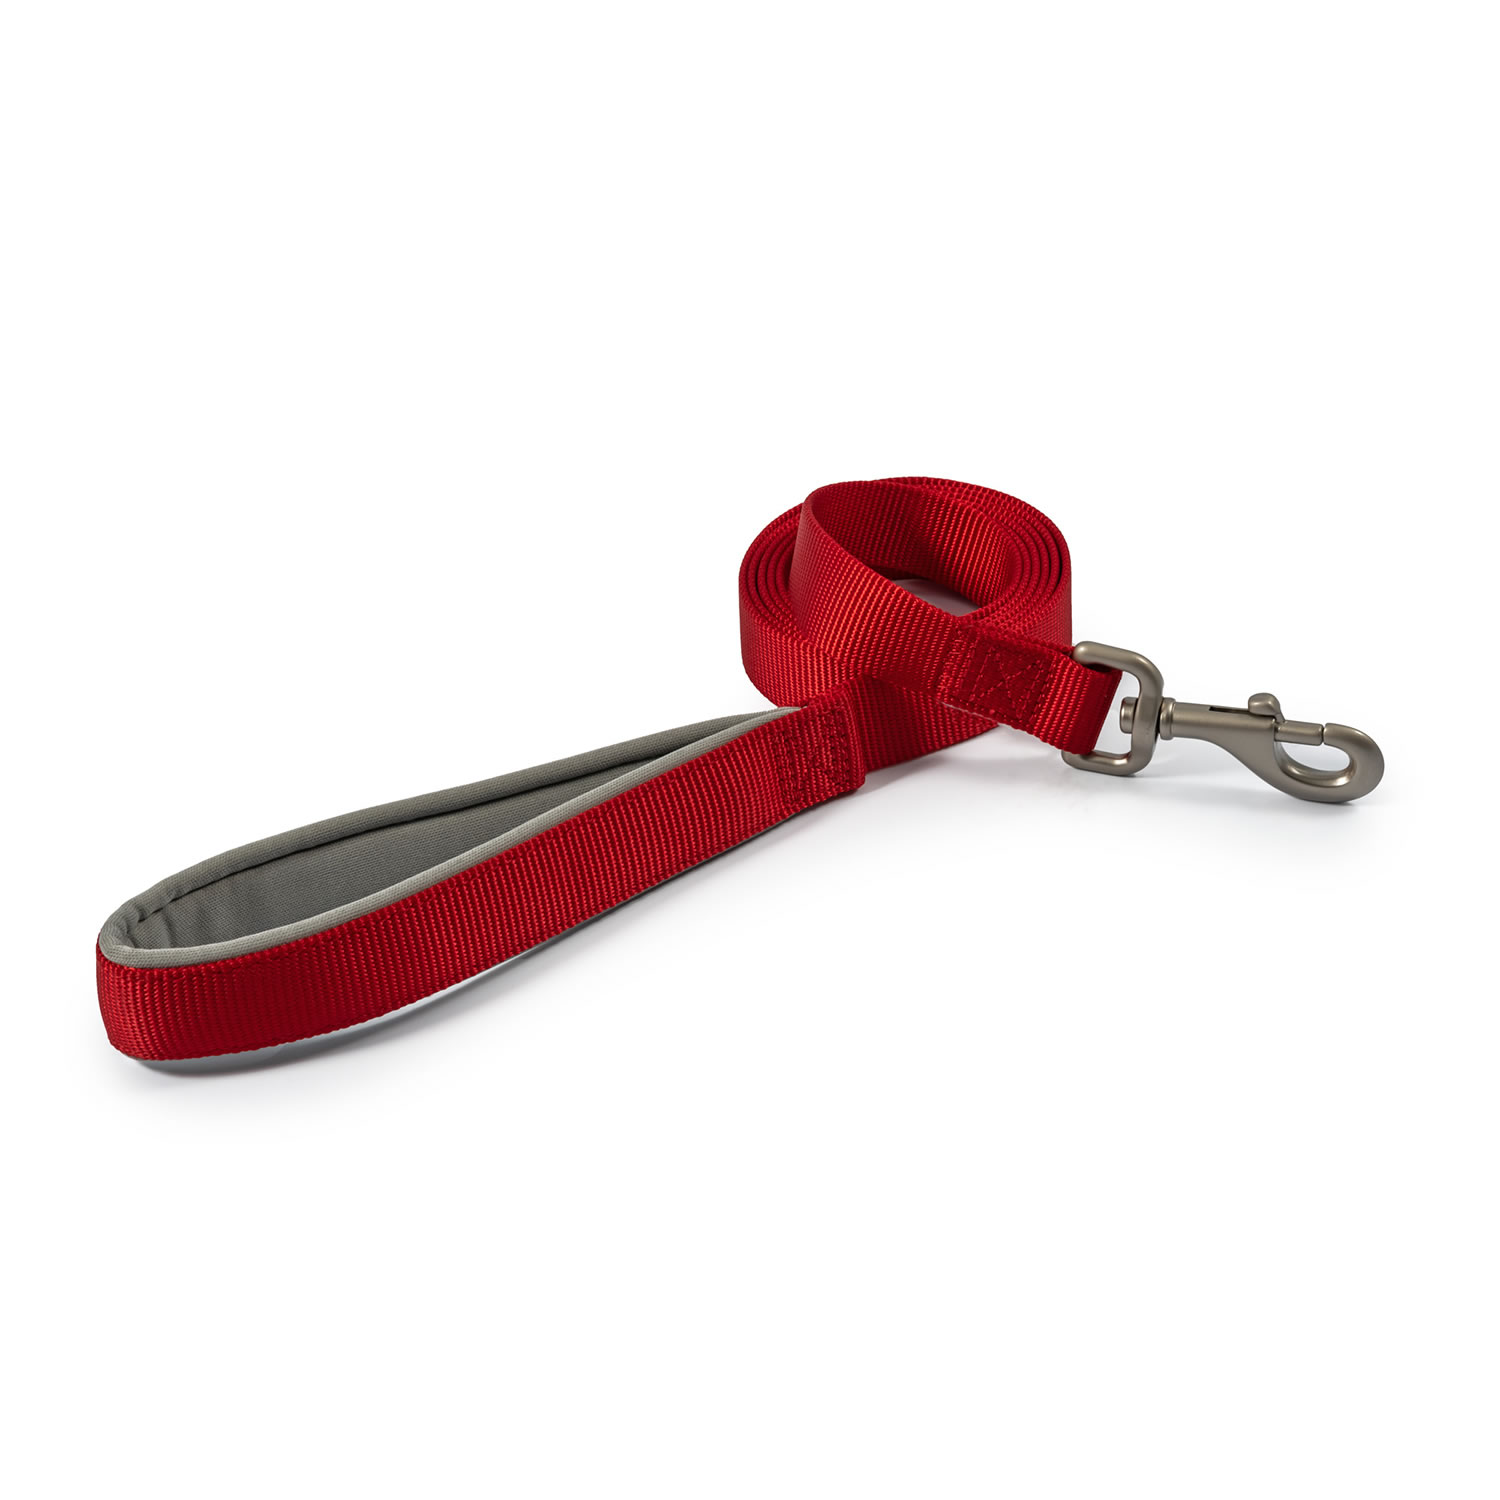 ANCOL VIVA PADDED LEAD RED ANCOL VIVA PADDED LEAD RED 1 M X 25 MM RED 1 M X 25 MM